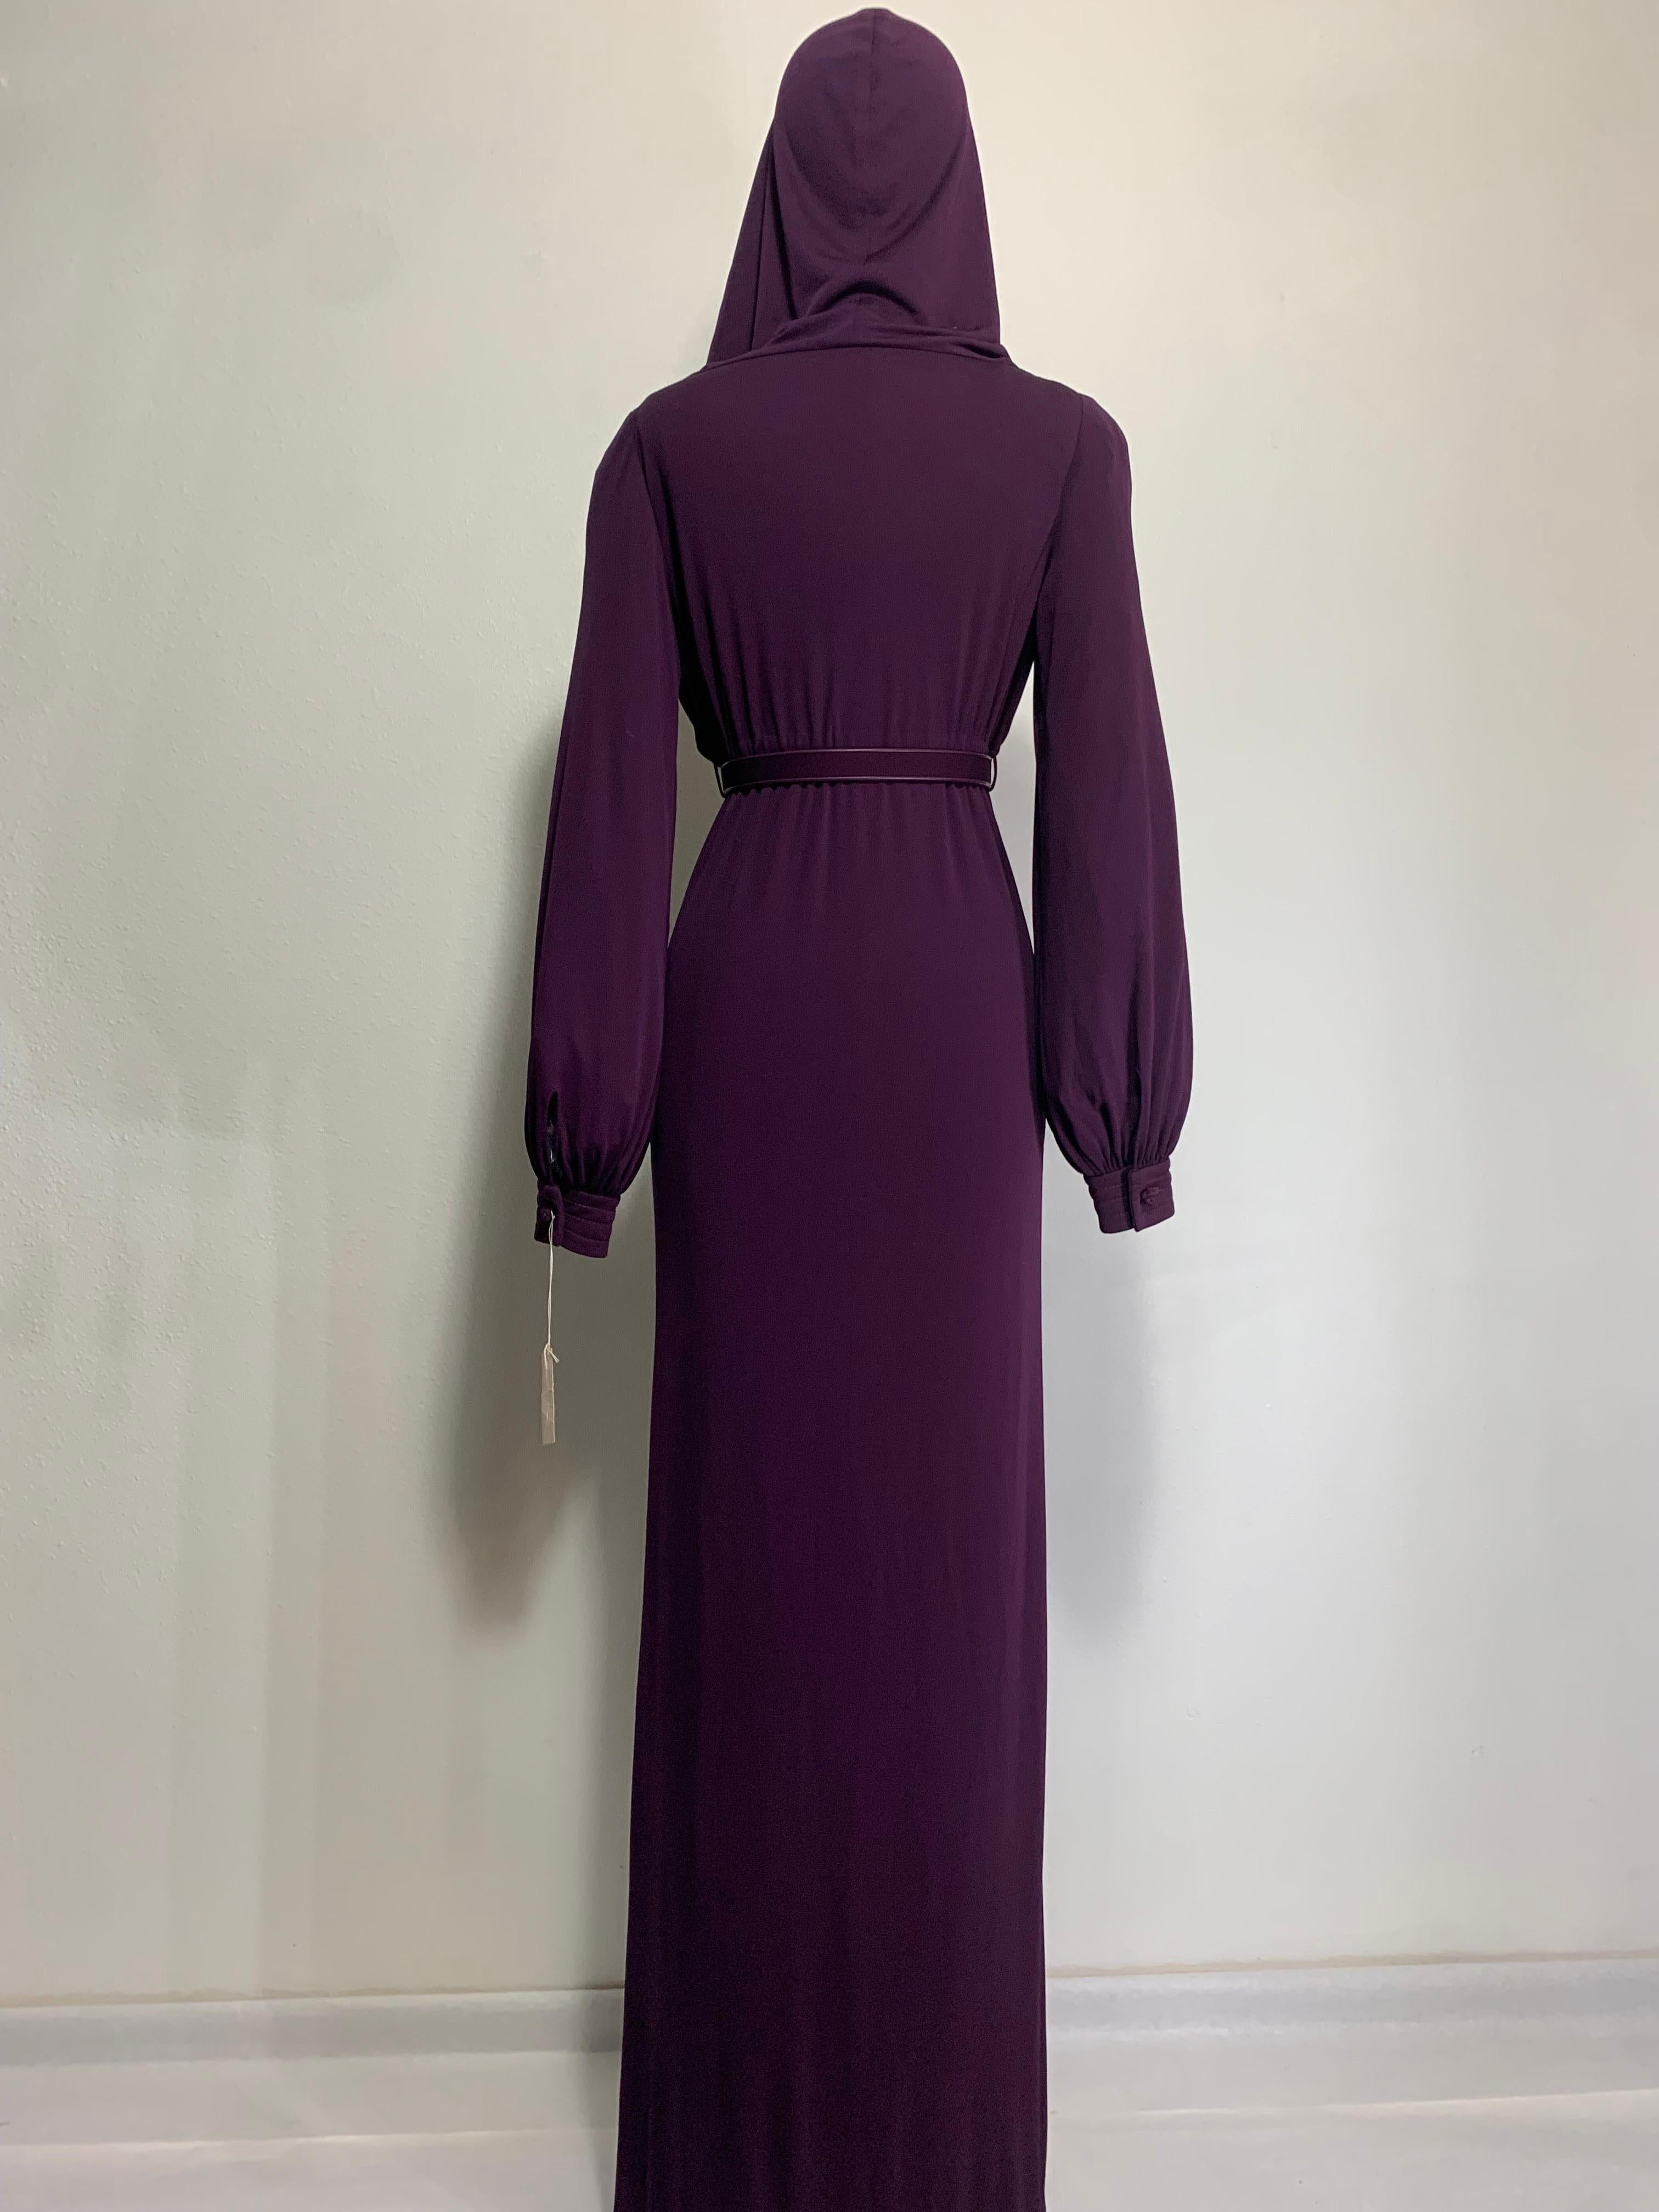 1975 James Galanos Dramatic Aubergine Jersey Maxi Gown w Fabulous Draped Hood For Sale 5